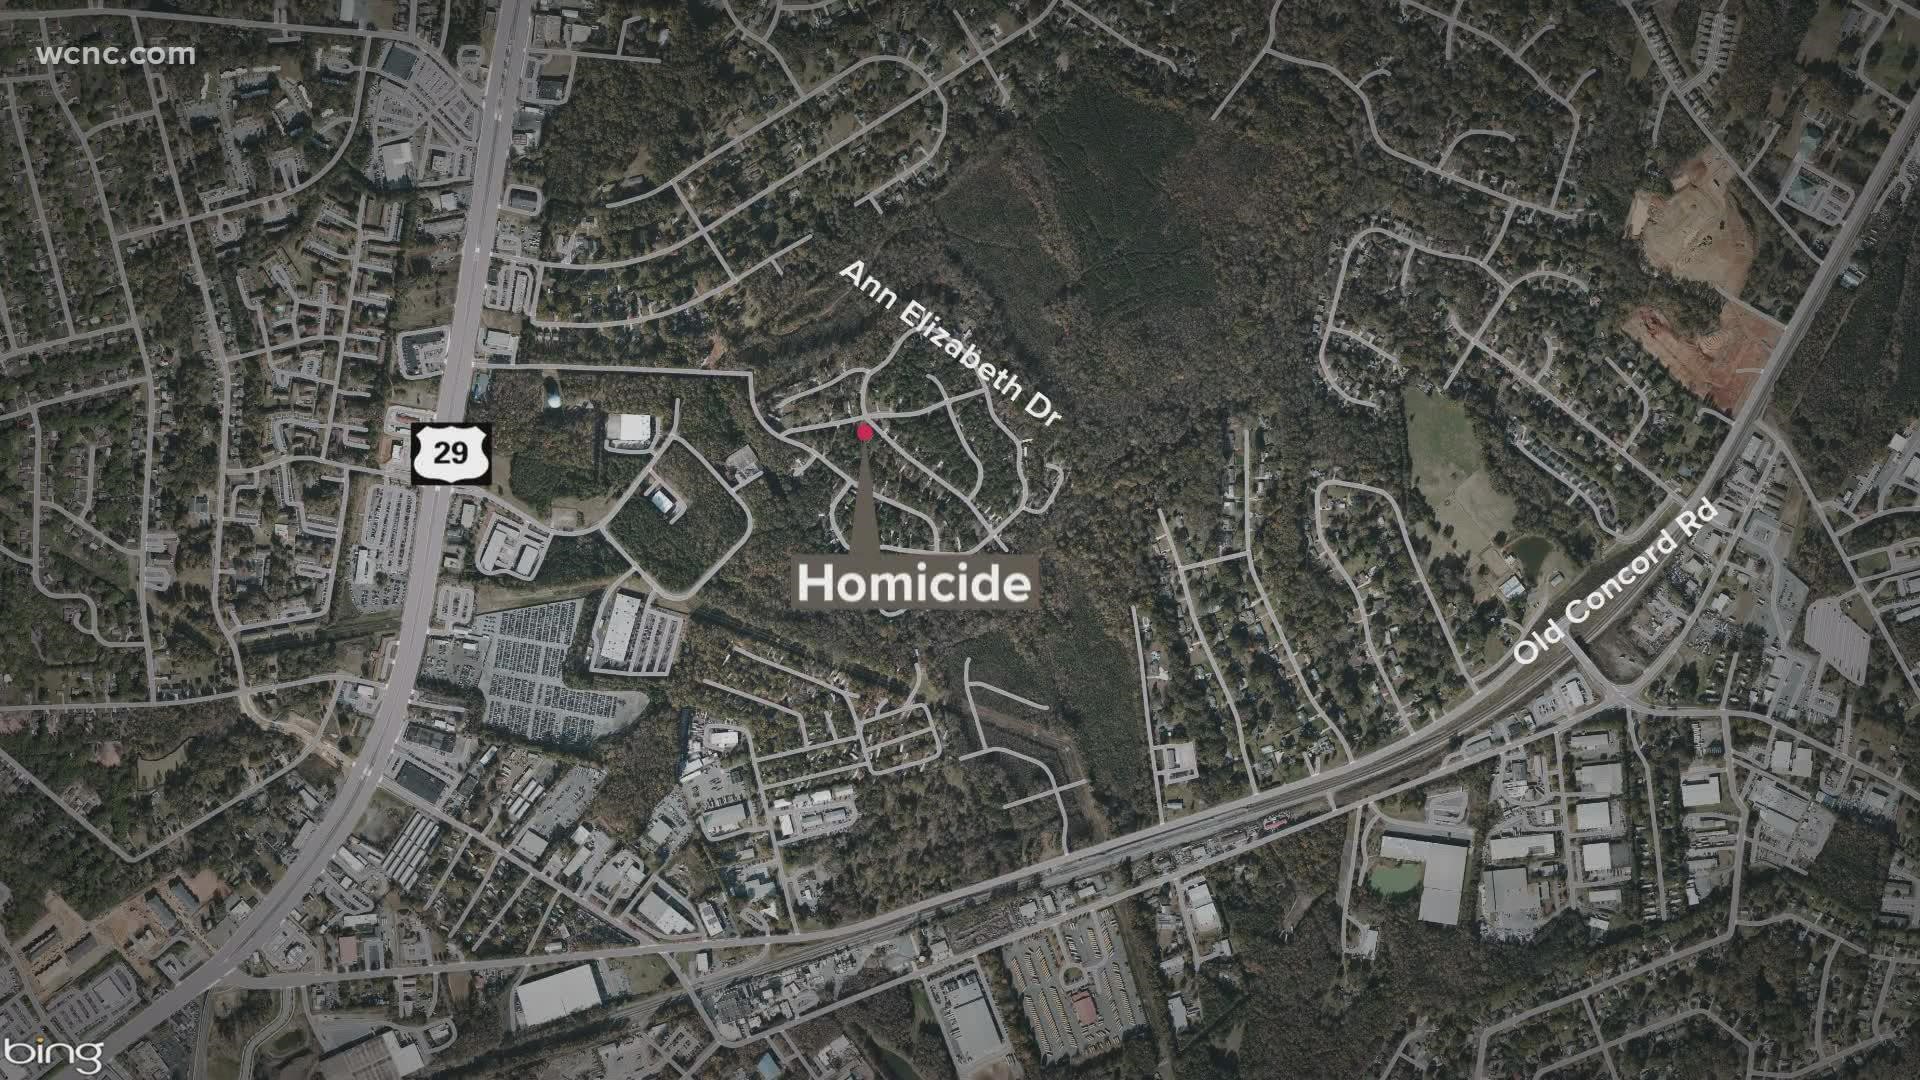 Police are investigating a homicide that left one person dead early Sunday.